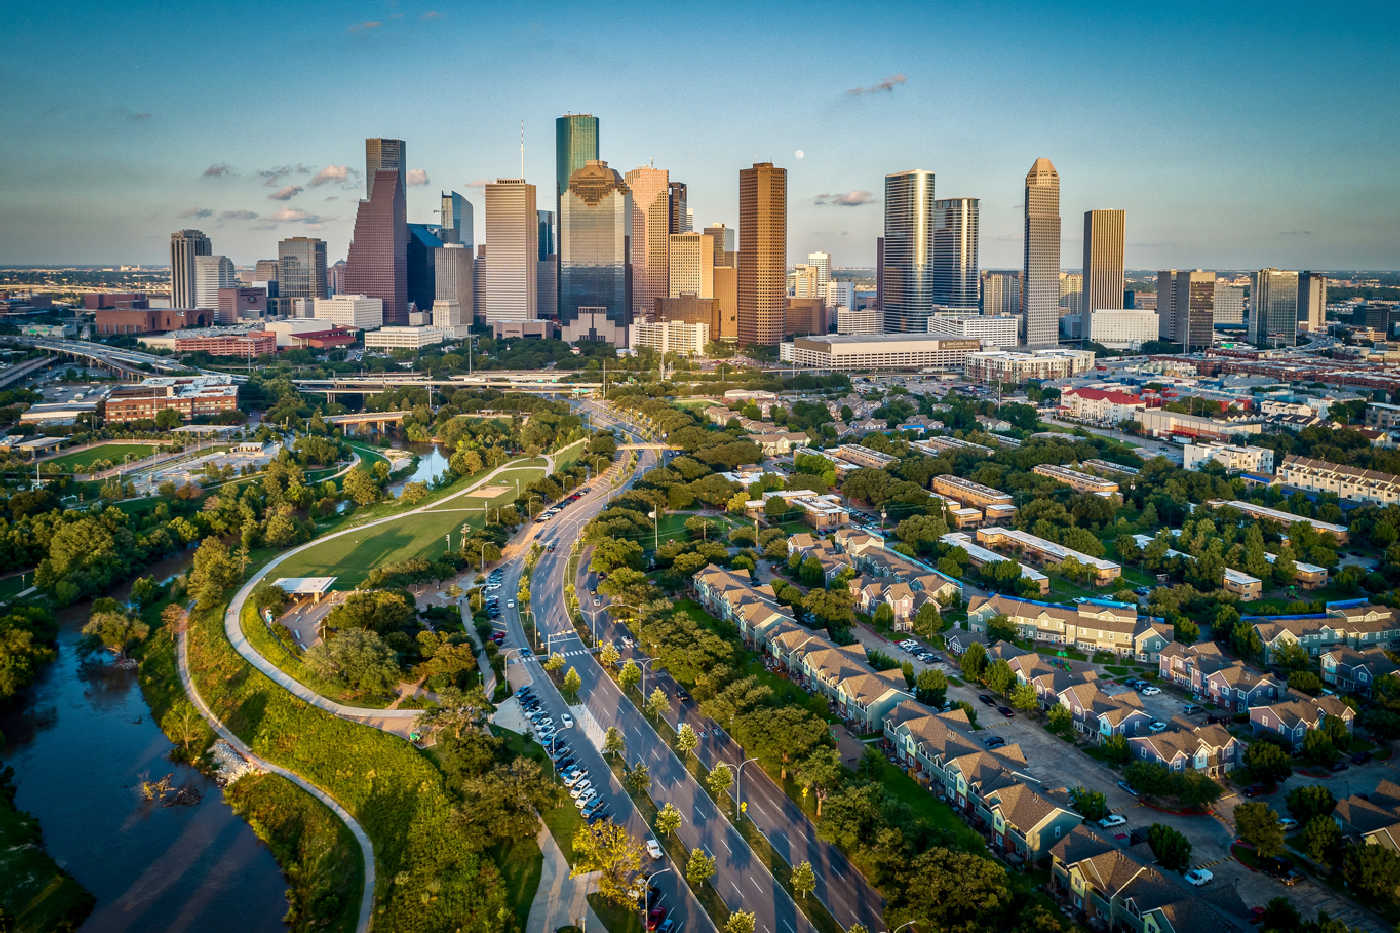 63 AMAZING AND FREE THINGS TO DO IN HOUSTON